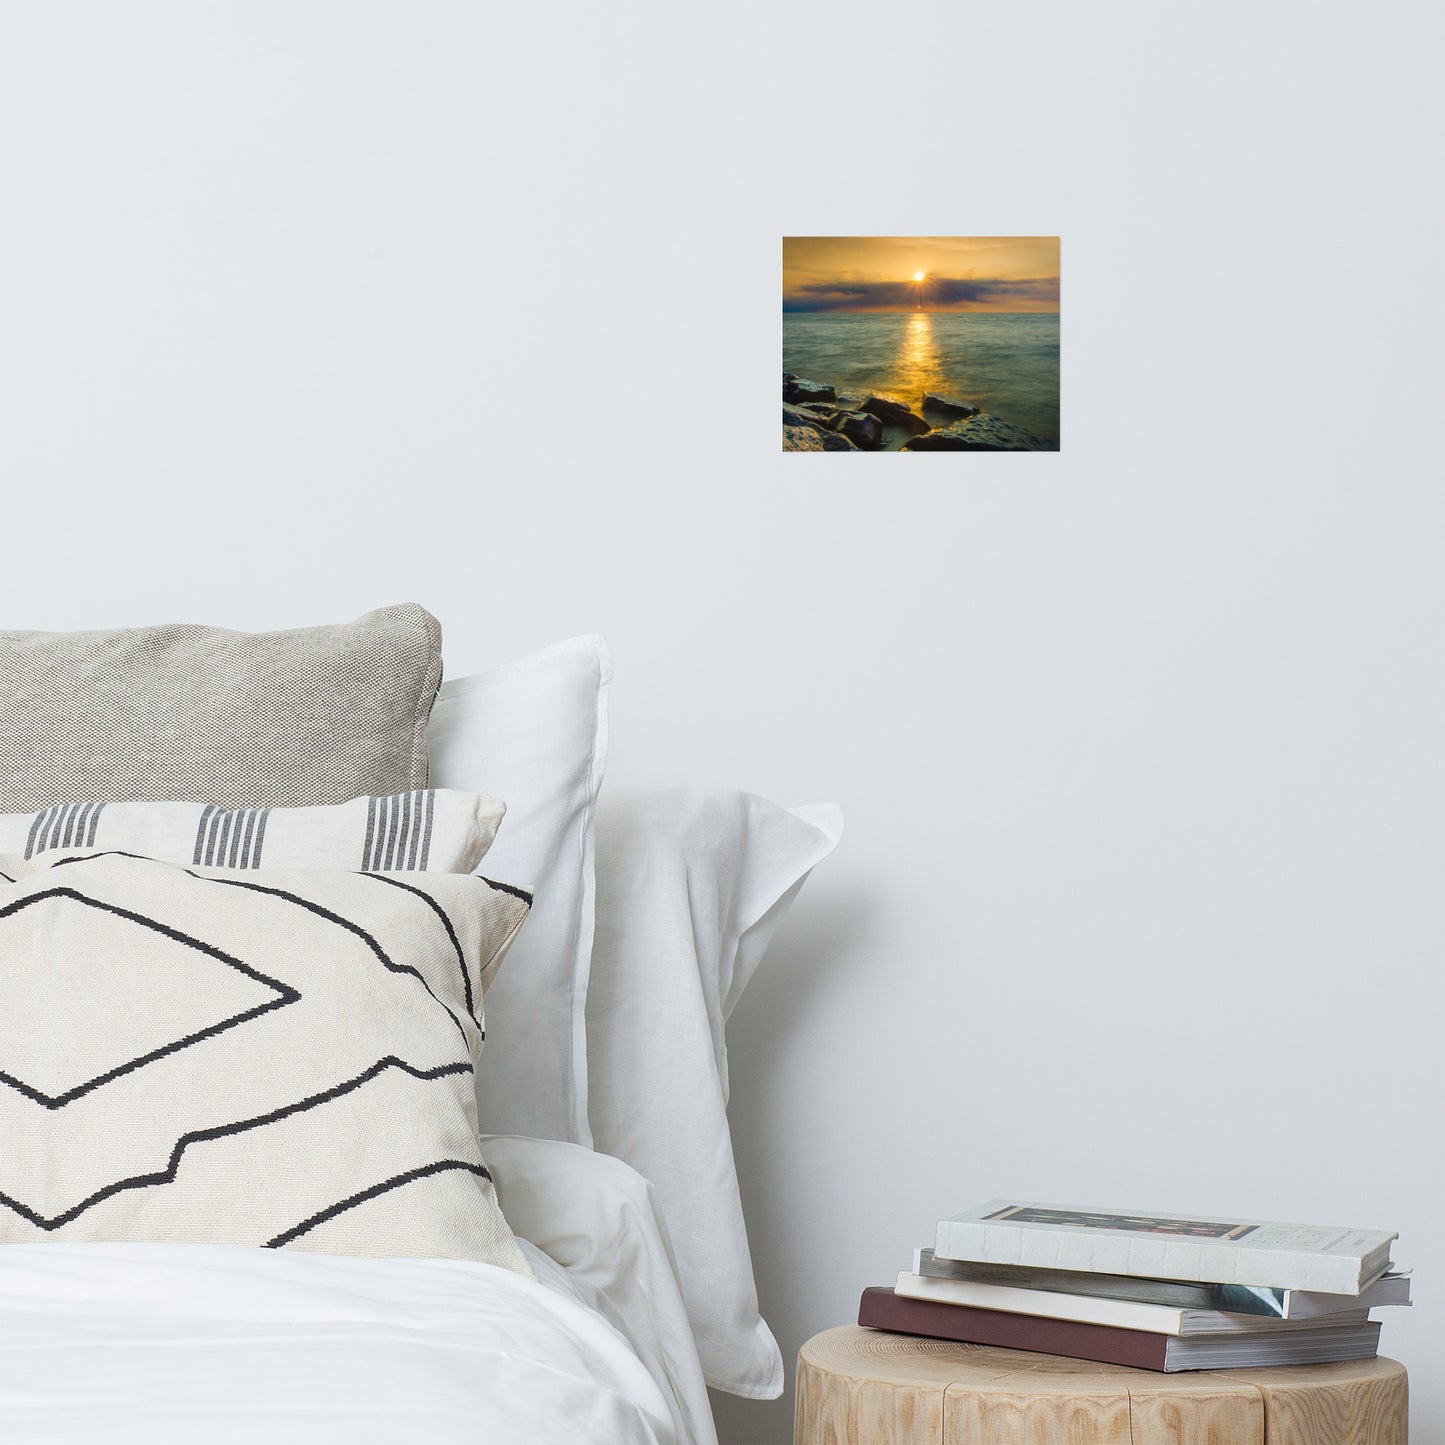 Sun Ray on the Water Landscape Photo Loose Wall Art Prints